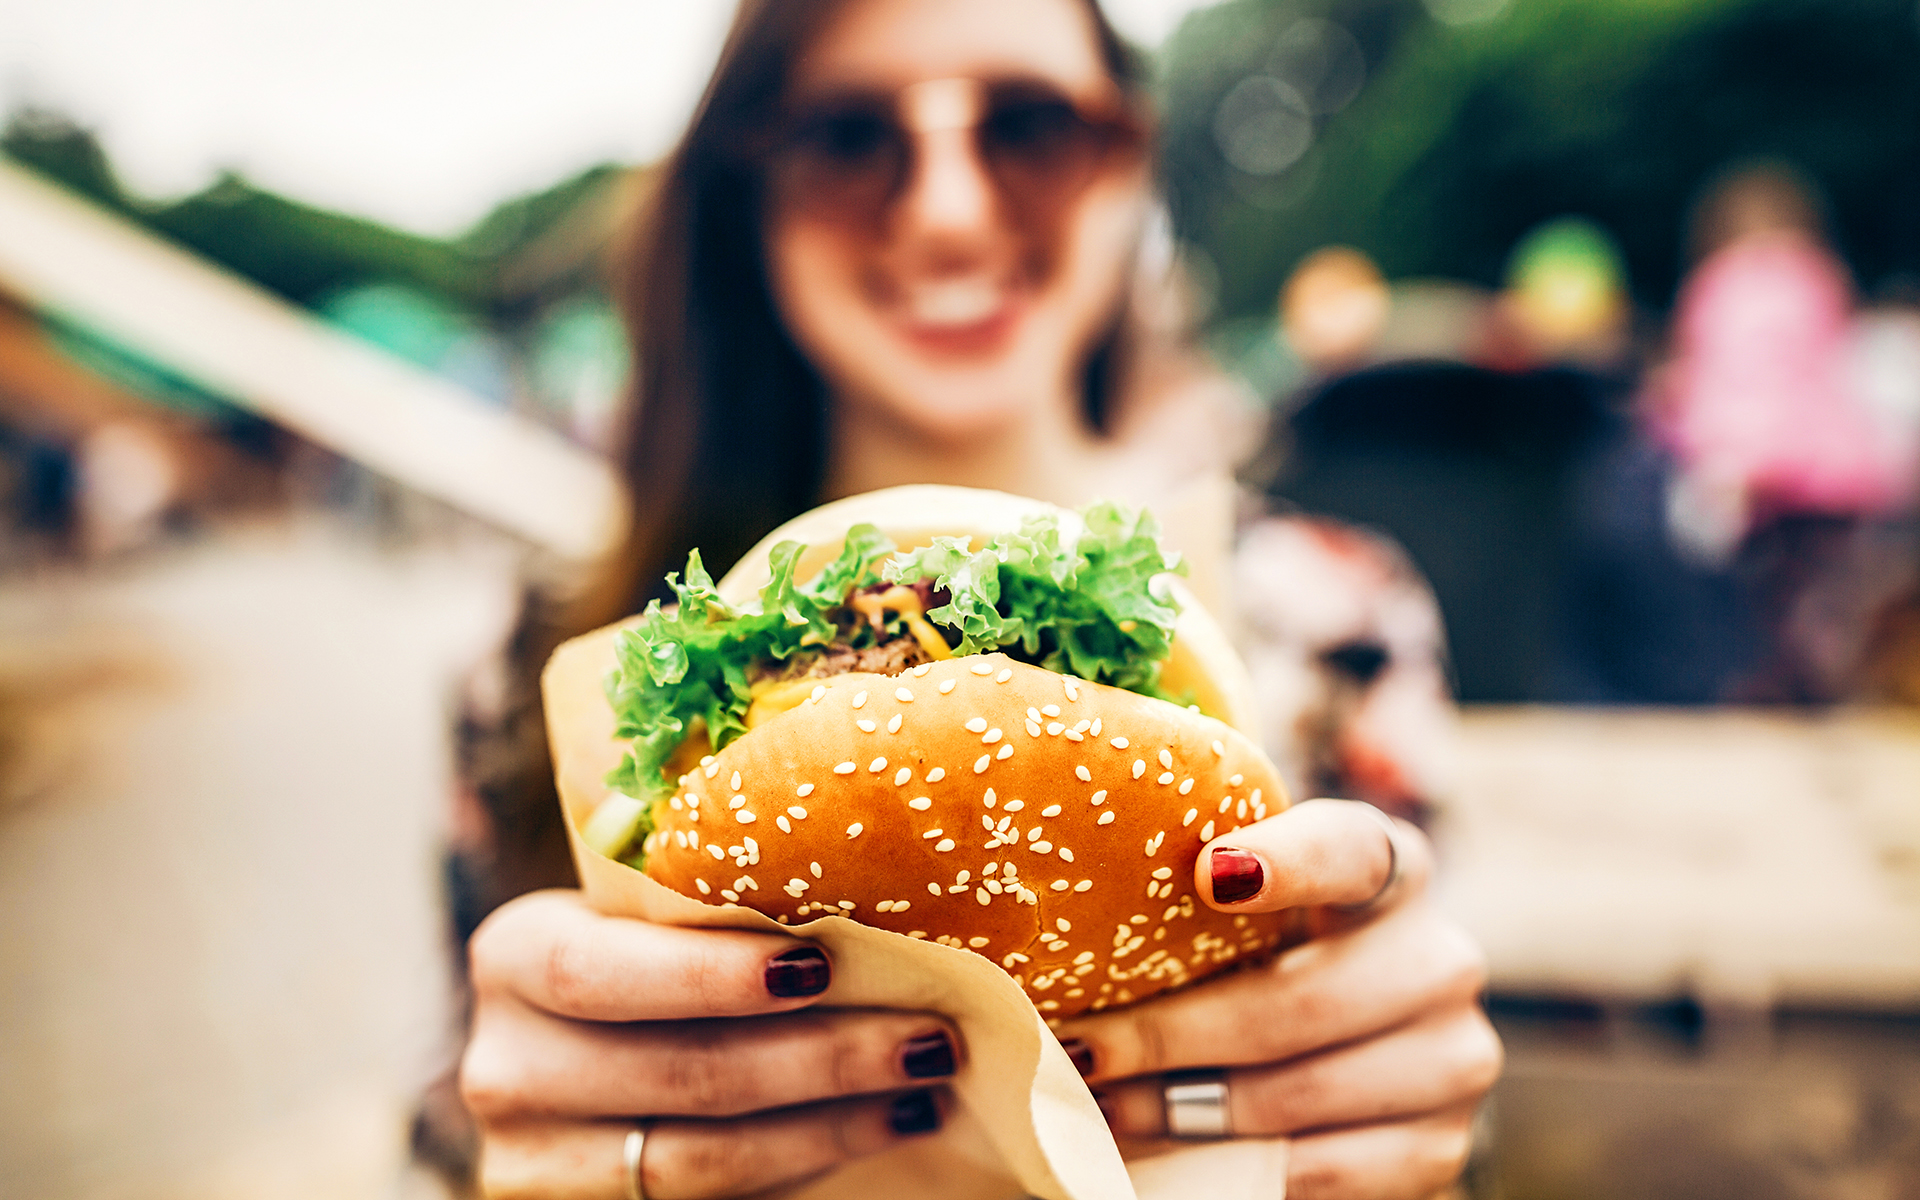 Ways to Practice Mindful Eating - Image of a woman holding a hamburger